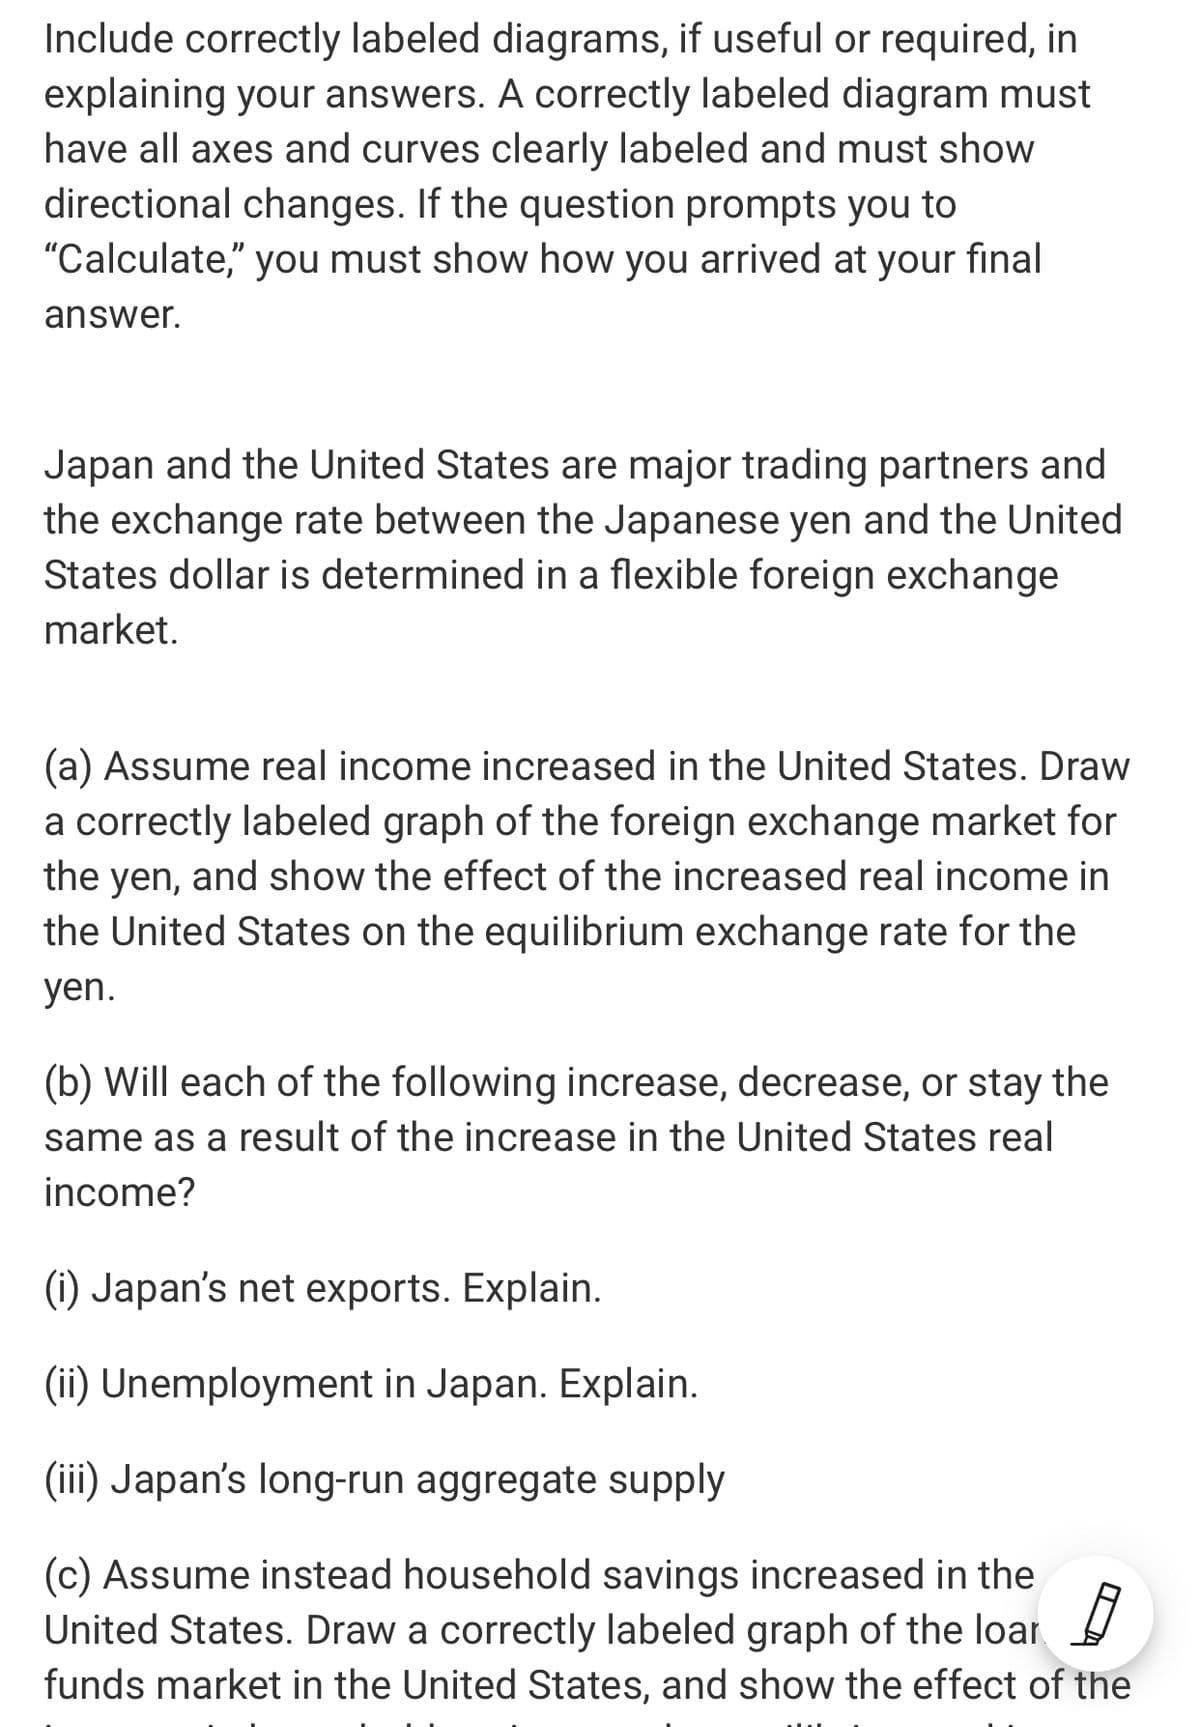 Include correctly labeled diagrams, if useful or required, in
explaining your answers. A correctly labeled diagram must
have all axes and curves clearly labeled and must show
directional changes. If the question prompts you to
"Calculate," you must show how you arrived at your final
answer.
Japan and the United States are major trading partners and
the exchange rate between the Japanese yen and the United
States dollar is determined in a flexible foreign exchange
market.
(a) Assume real income increased in the United States. Draw
a correctly labeled graph of the foreign exchange market for
the yen, and show the effect of the increased real income in
the United States on the equilibrium exchange rate for the
yen.
(b) Will each of the following increase, decrease, or stay the
same as a result of the increase in the United States real
income?
(1) Japan's net exports. Explain.
(ii) Unemployment in Japan. Explain.
(iii) Japan's long-run aggregate supply
(c) Assume instead household savings increased in the
United States. Draw a correctly labeled graph of the loar
funds market in the United States, and show the effect of the
